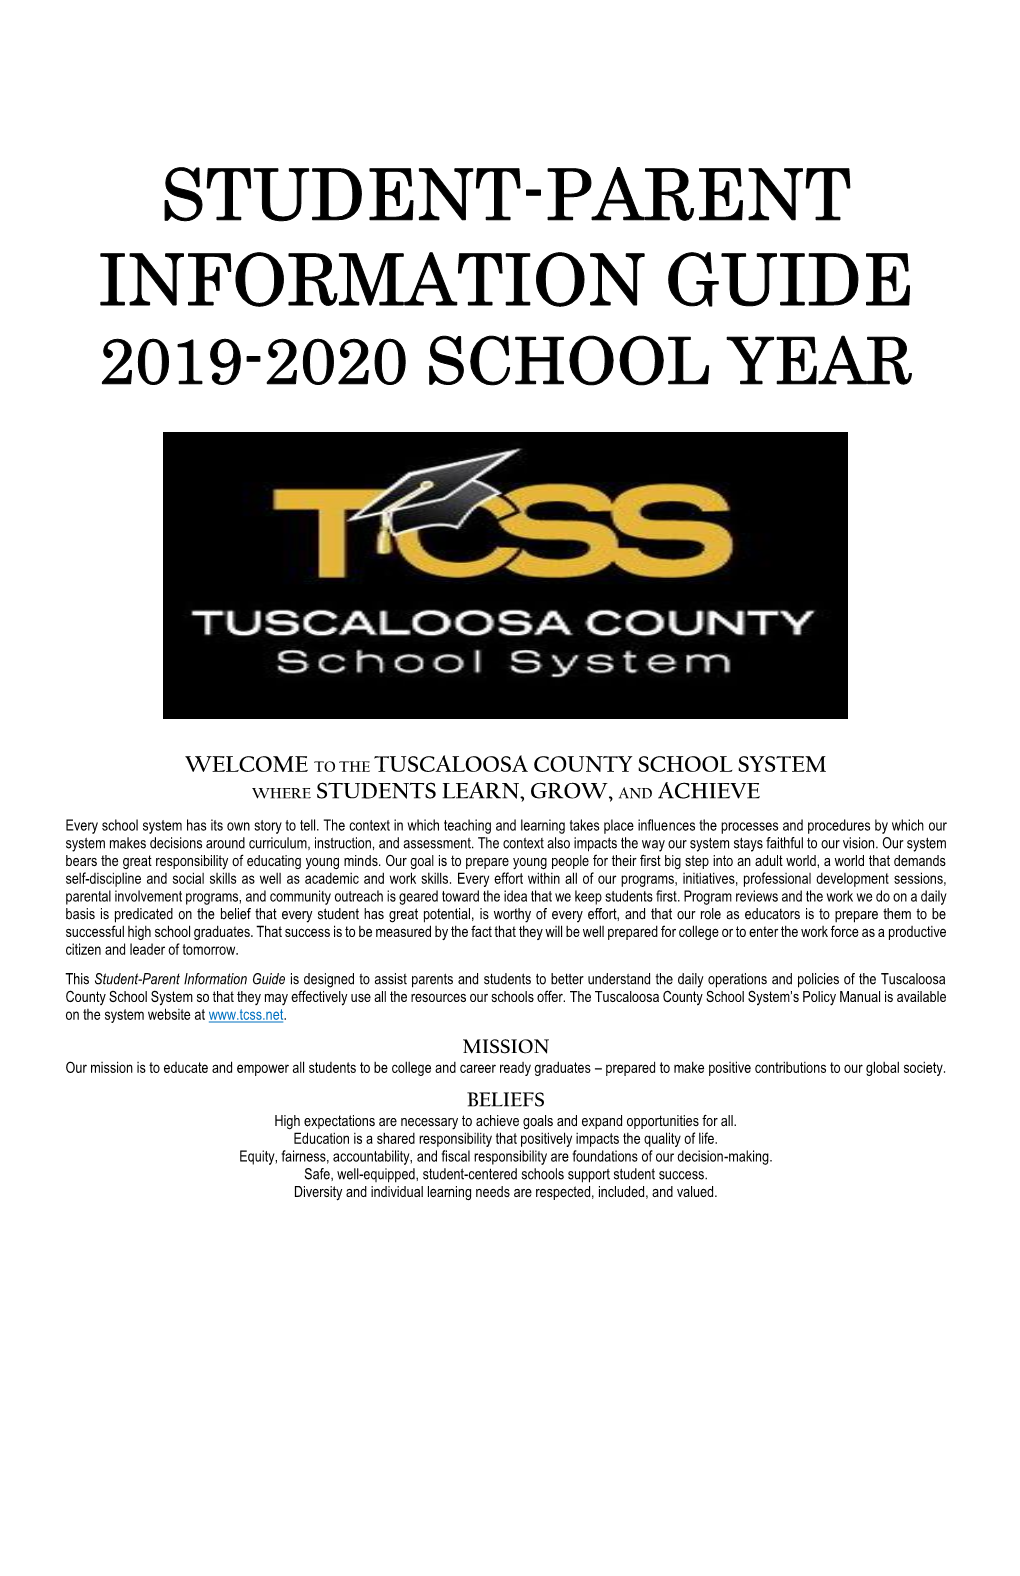 Student-Parent Information Guide 2019-2020 School Year